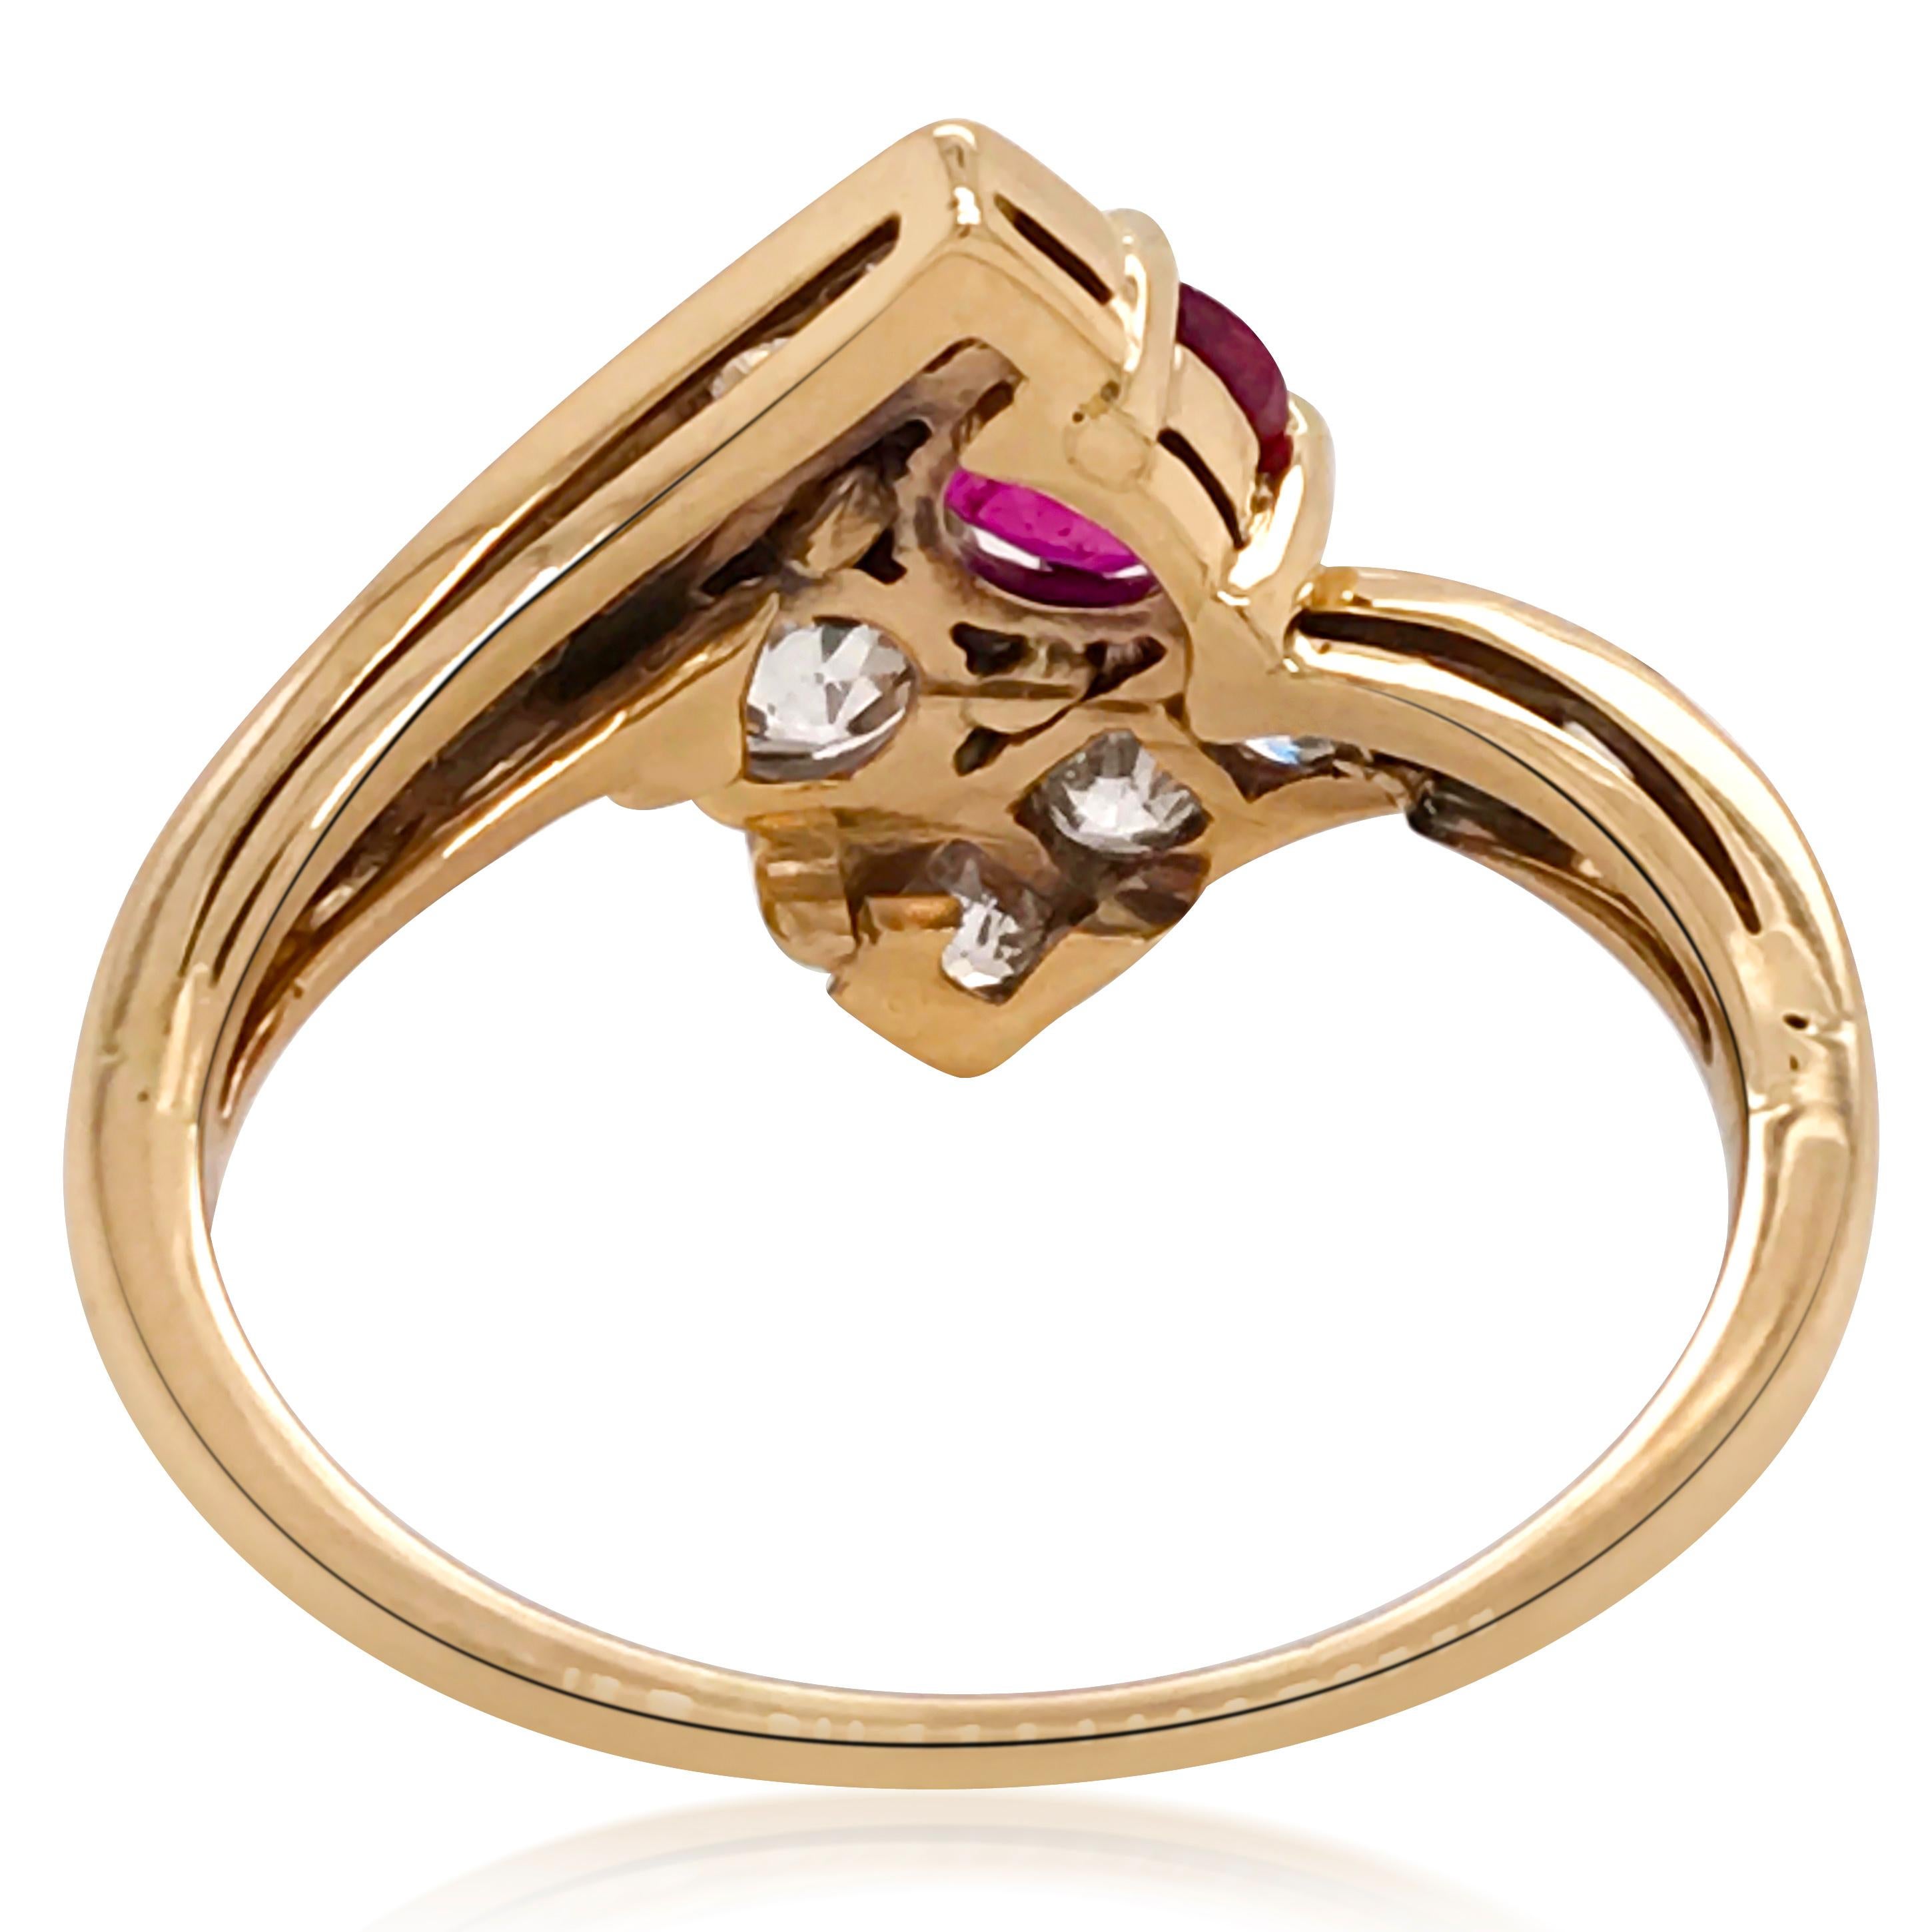 This shimmering ruby and diamond ring is crafted in 14K yellow gold, weighing 3.4 grams and in ring size 8 (adjustable). It is centered with one 0.57-carat round ruby and one 0.5-carat round diamond, further enhanced with two rows of diamonds,